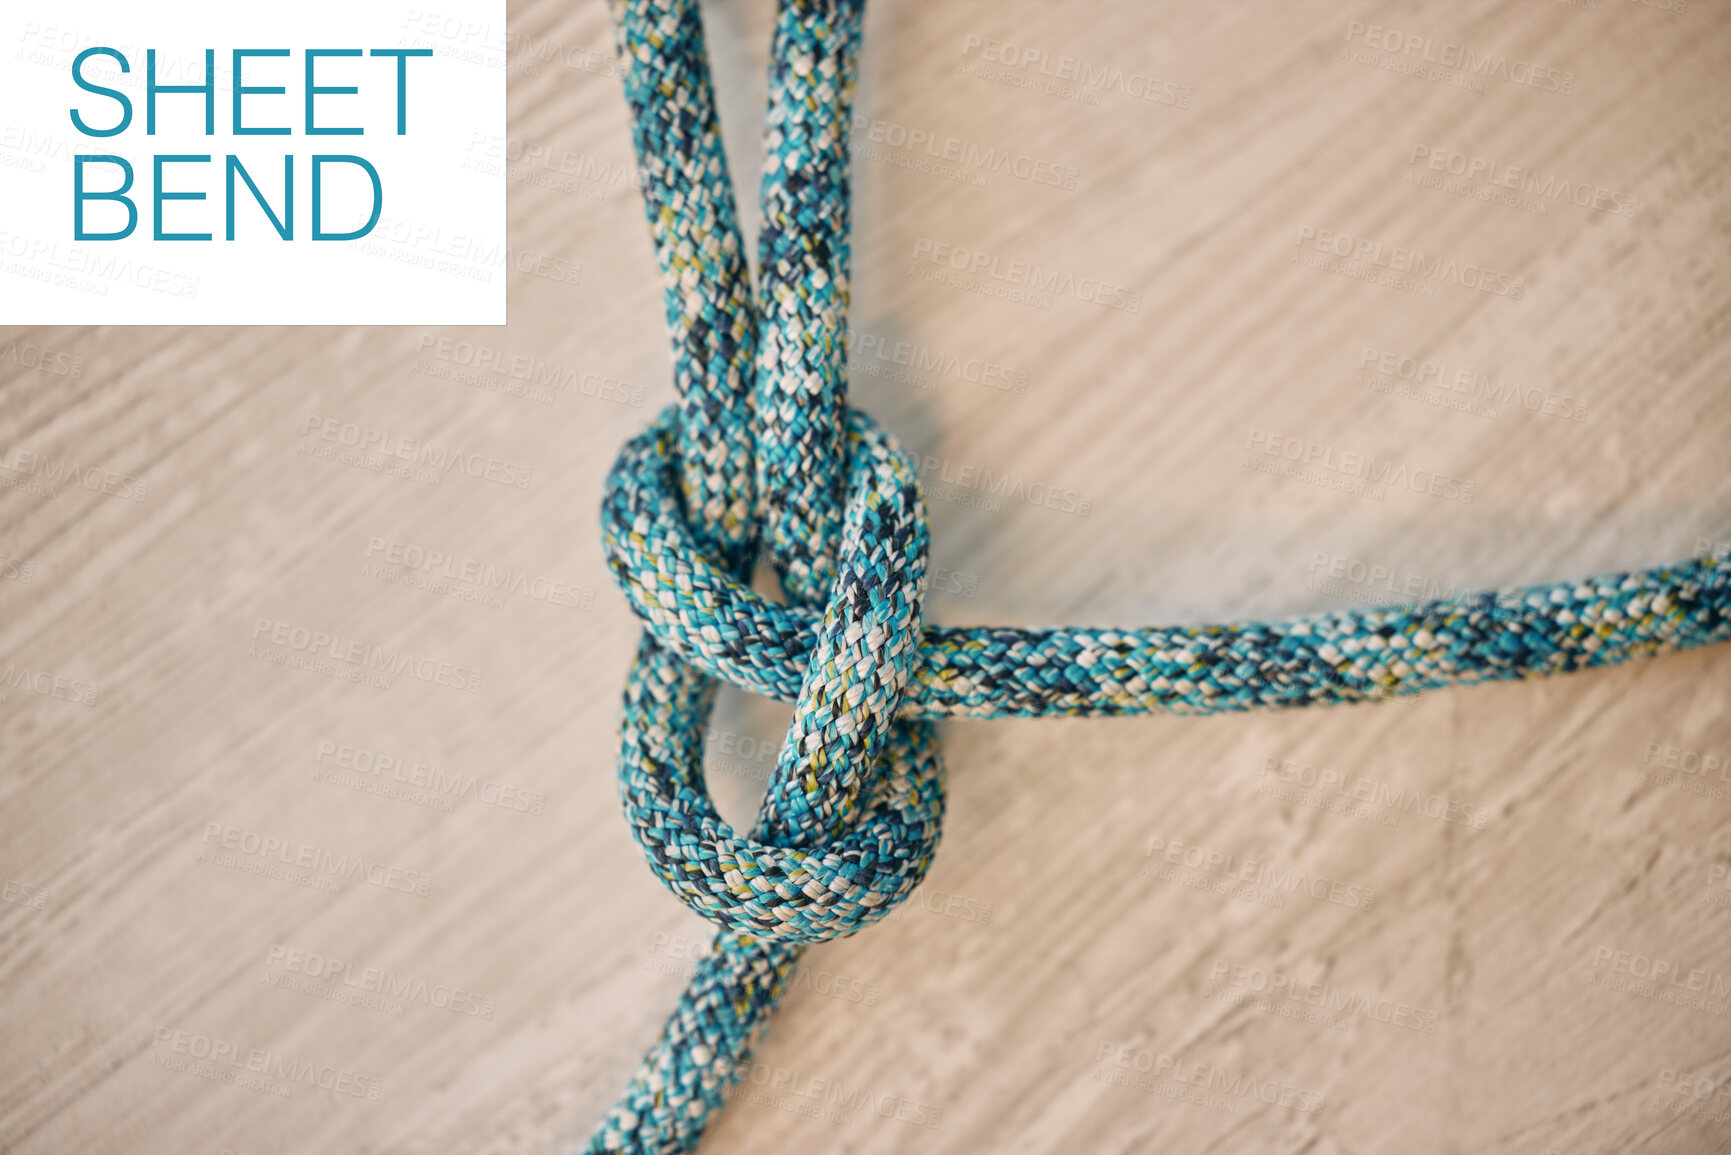 Buy stock photo Hiking rope in a knot against a wooden floor background in a studio from above. Strong sheet bend tie, cable or cord equipment to secure safety while mountain climbing or extreme sports for athletes.